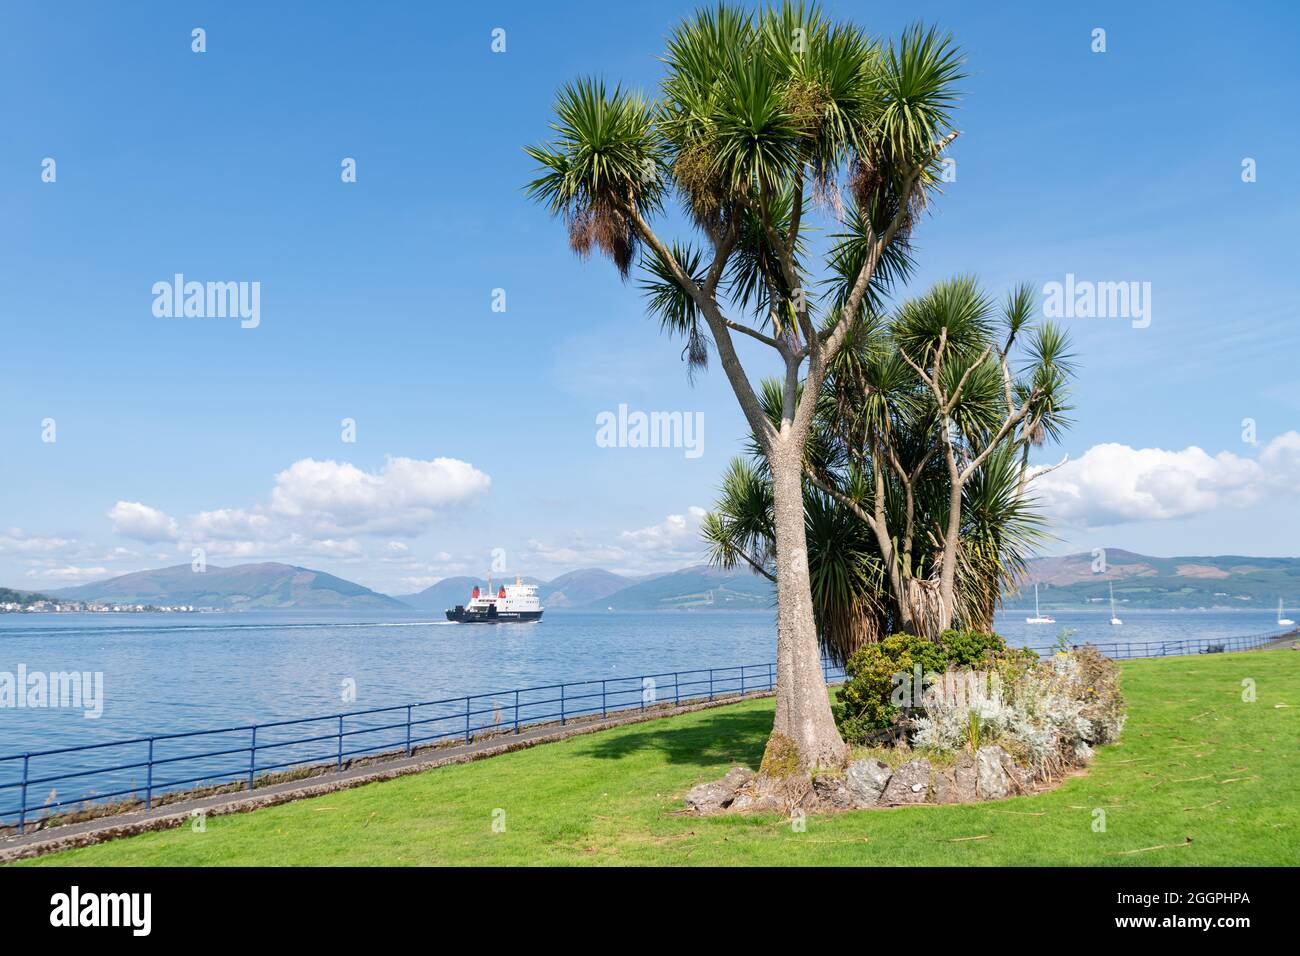 Isle of Bute - cabbage palm trees and calmac passenger ferry - Rothesay, Isle of Bute, Argyll and Bute, Scotland, UK Stock Photo